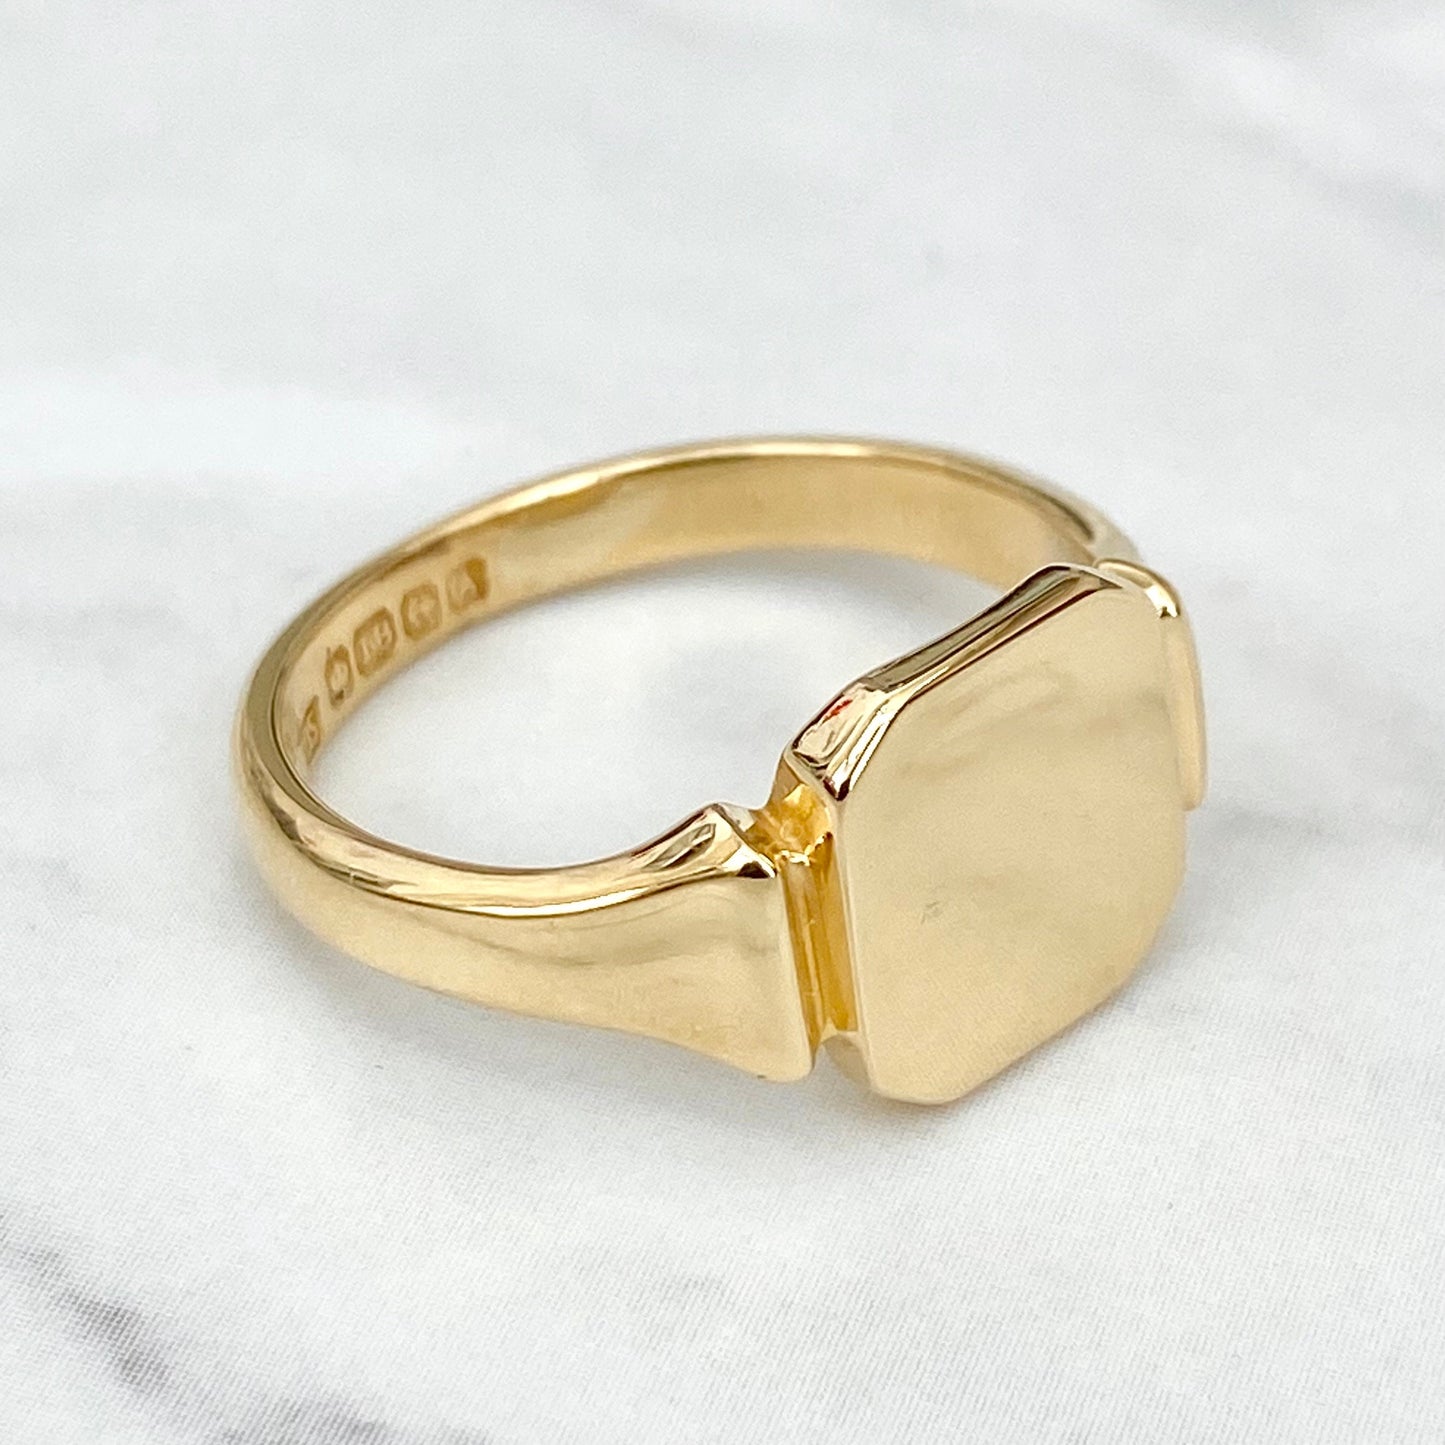 Vintage 18ct yellow gold sqaure cushion signet ring - Can be hand engraved - UK size S 1/2 - US size 9 1/4 - British vintage jewellery